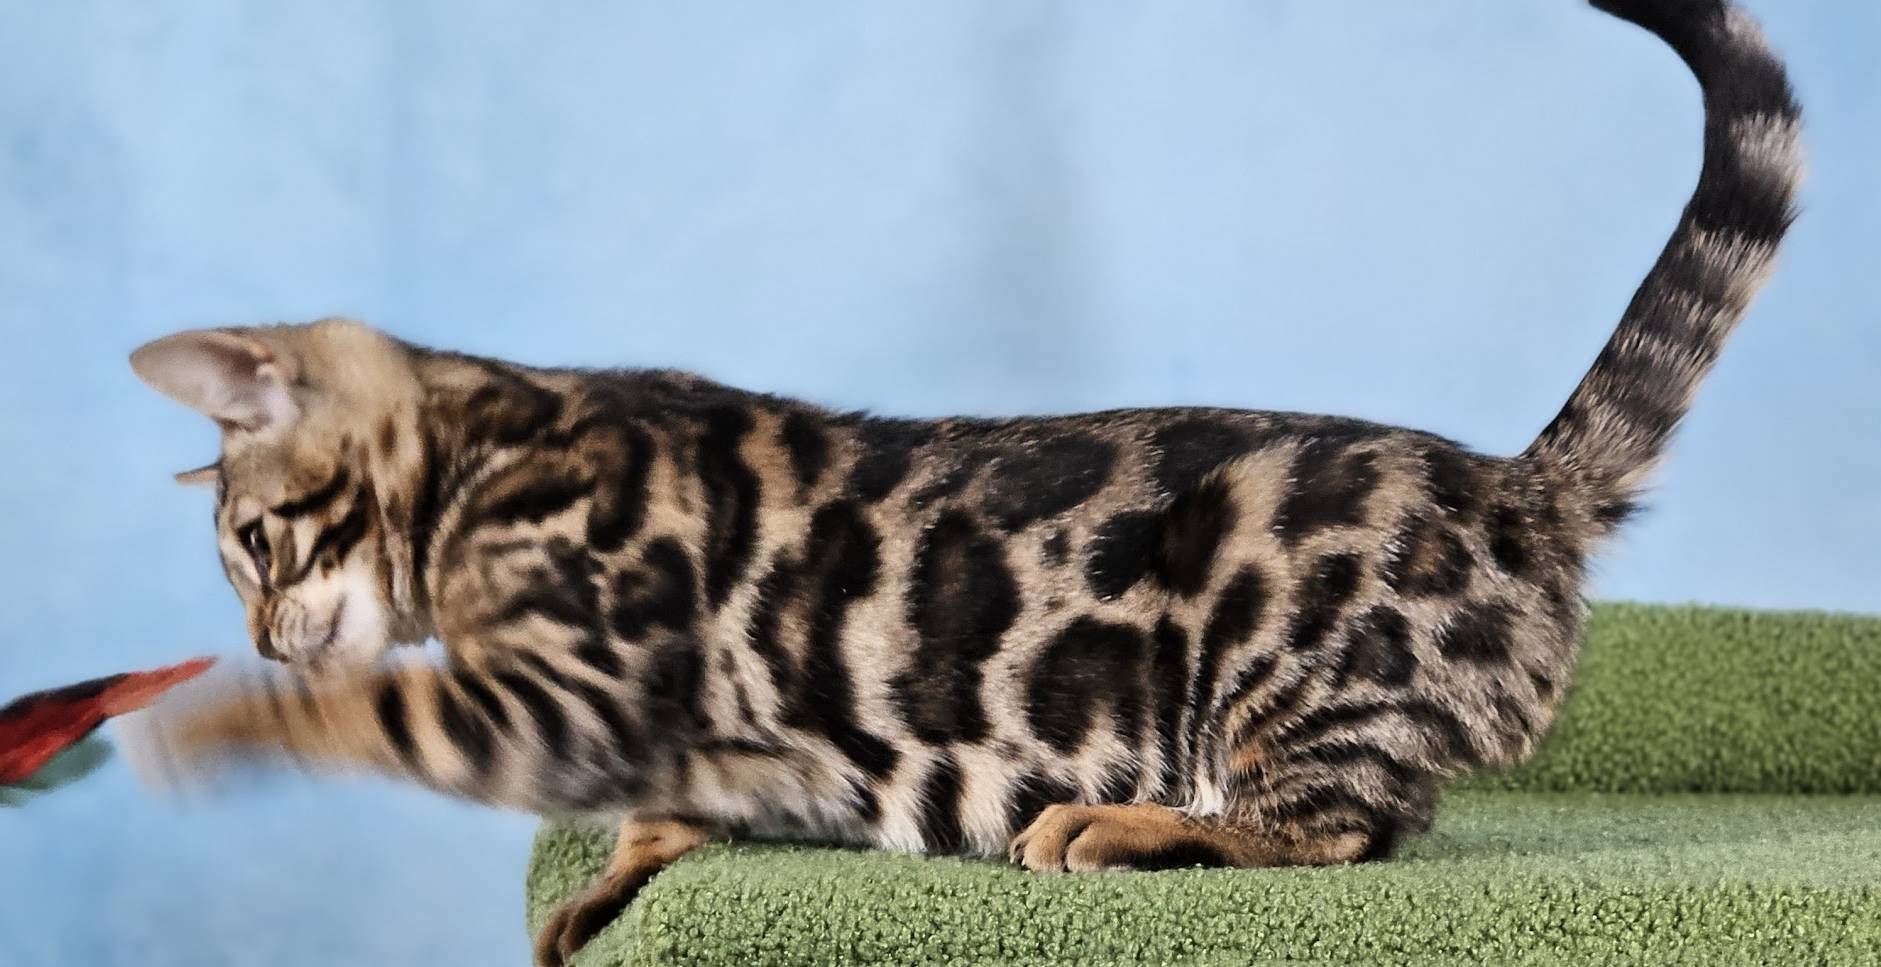 BROWN SPOTTED BENGAL KITTEN